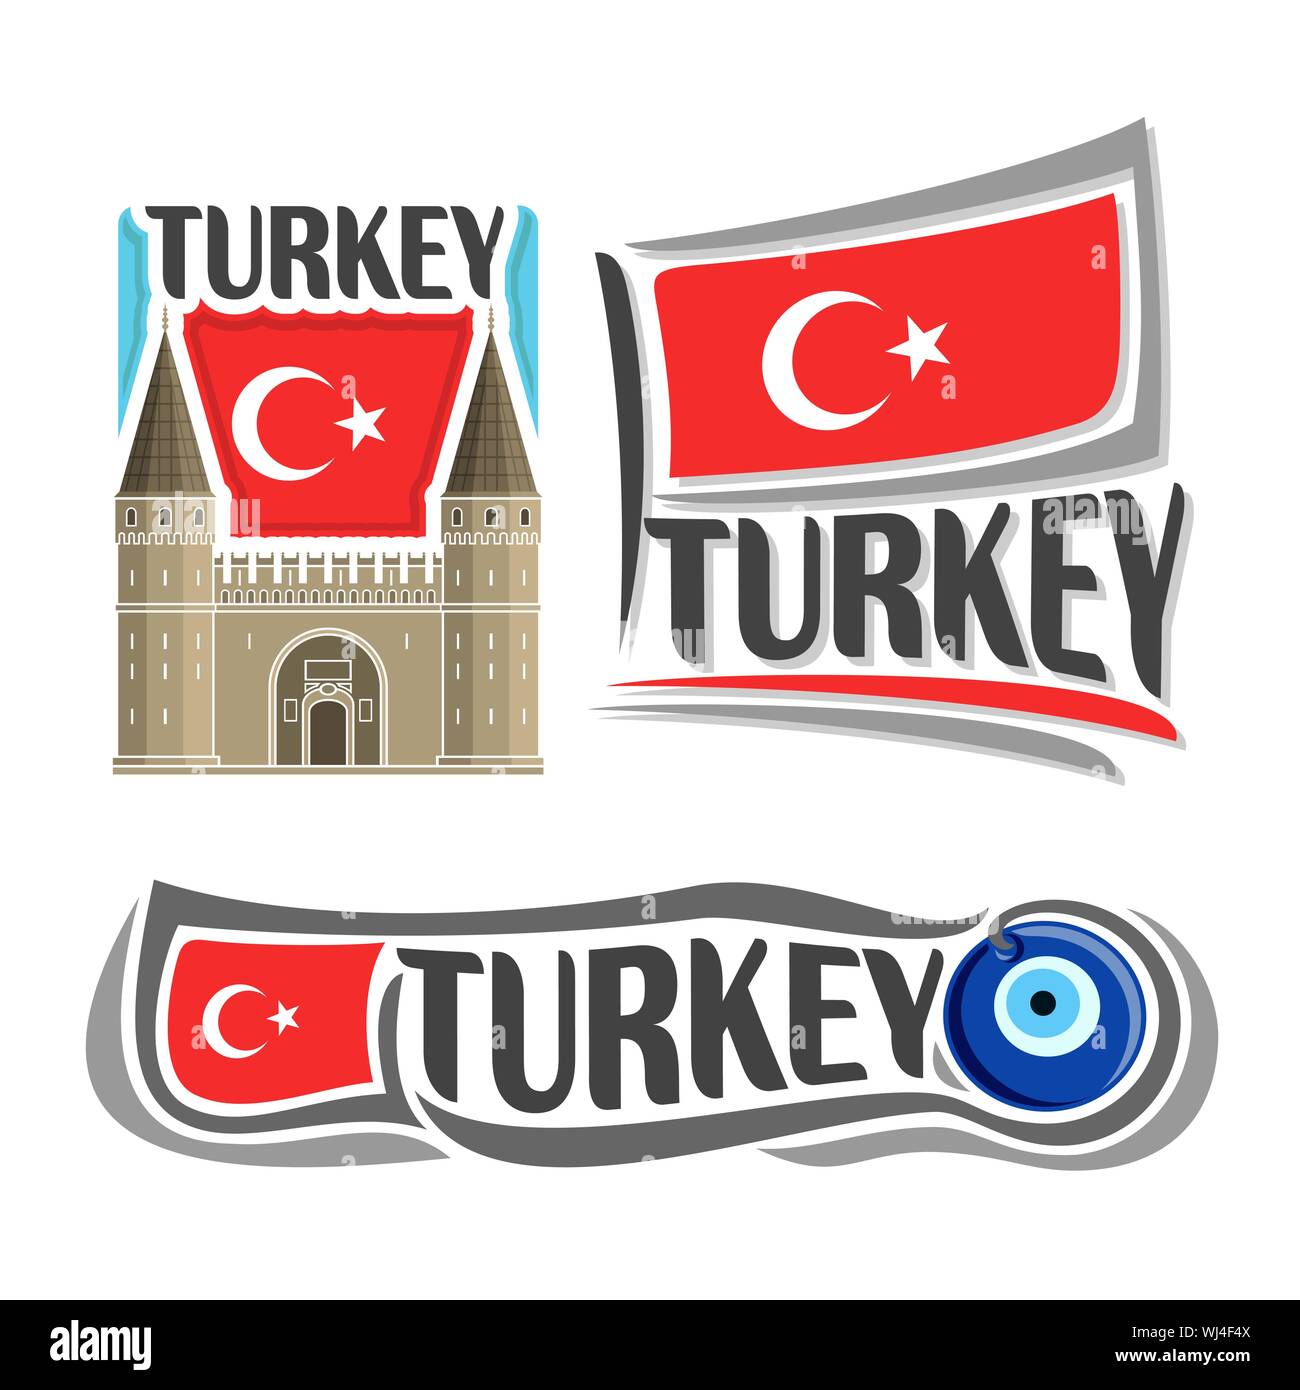 Vector logo for Turkey, consisting of 3 isolated illustrations: Topkapi Palace in Istanbul on background of national state flag, symbol of Turkey and Stock Vector